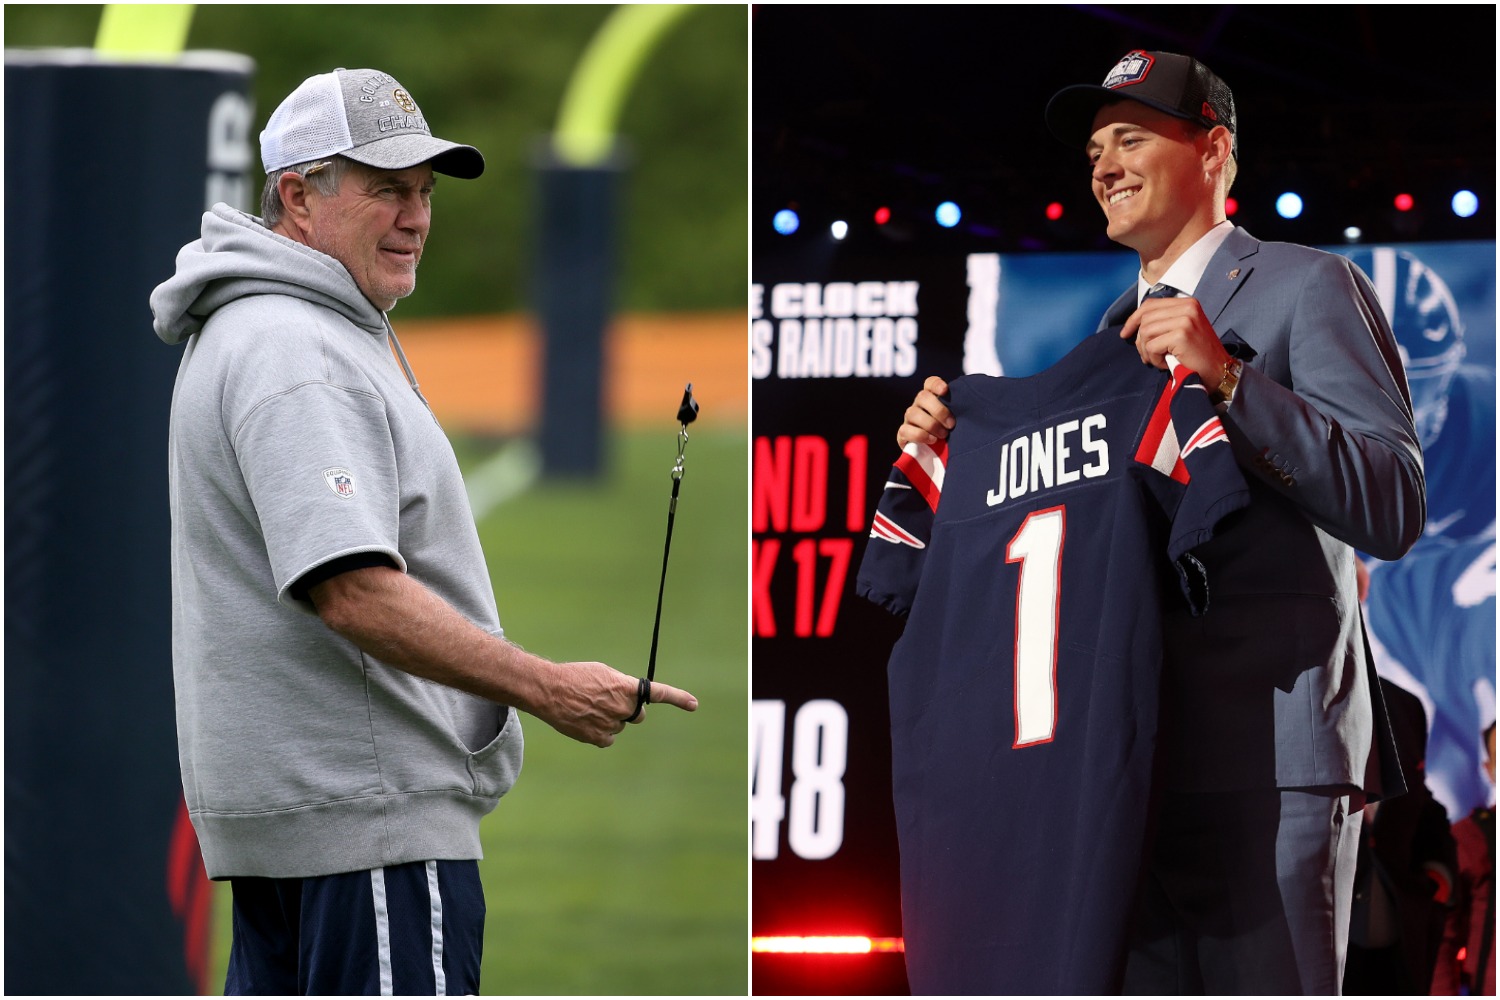 Patriots head coach Bill Belichick watches practice as Mac Jones holds up his Patriots jersey after getting selected 15th overall in the 2021 NFL draft.